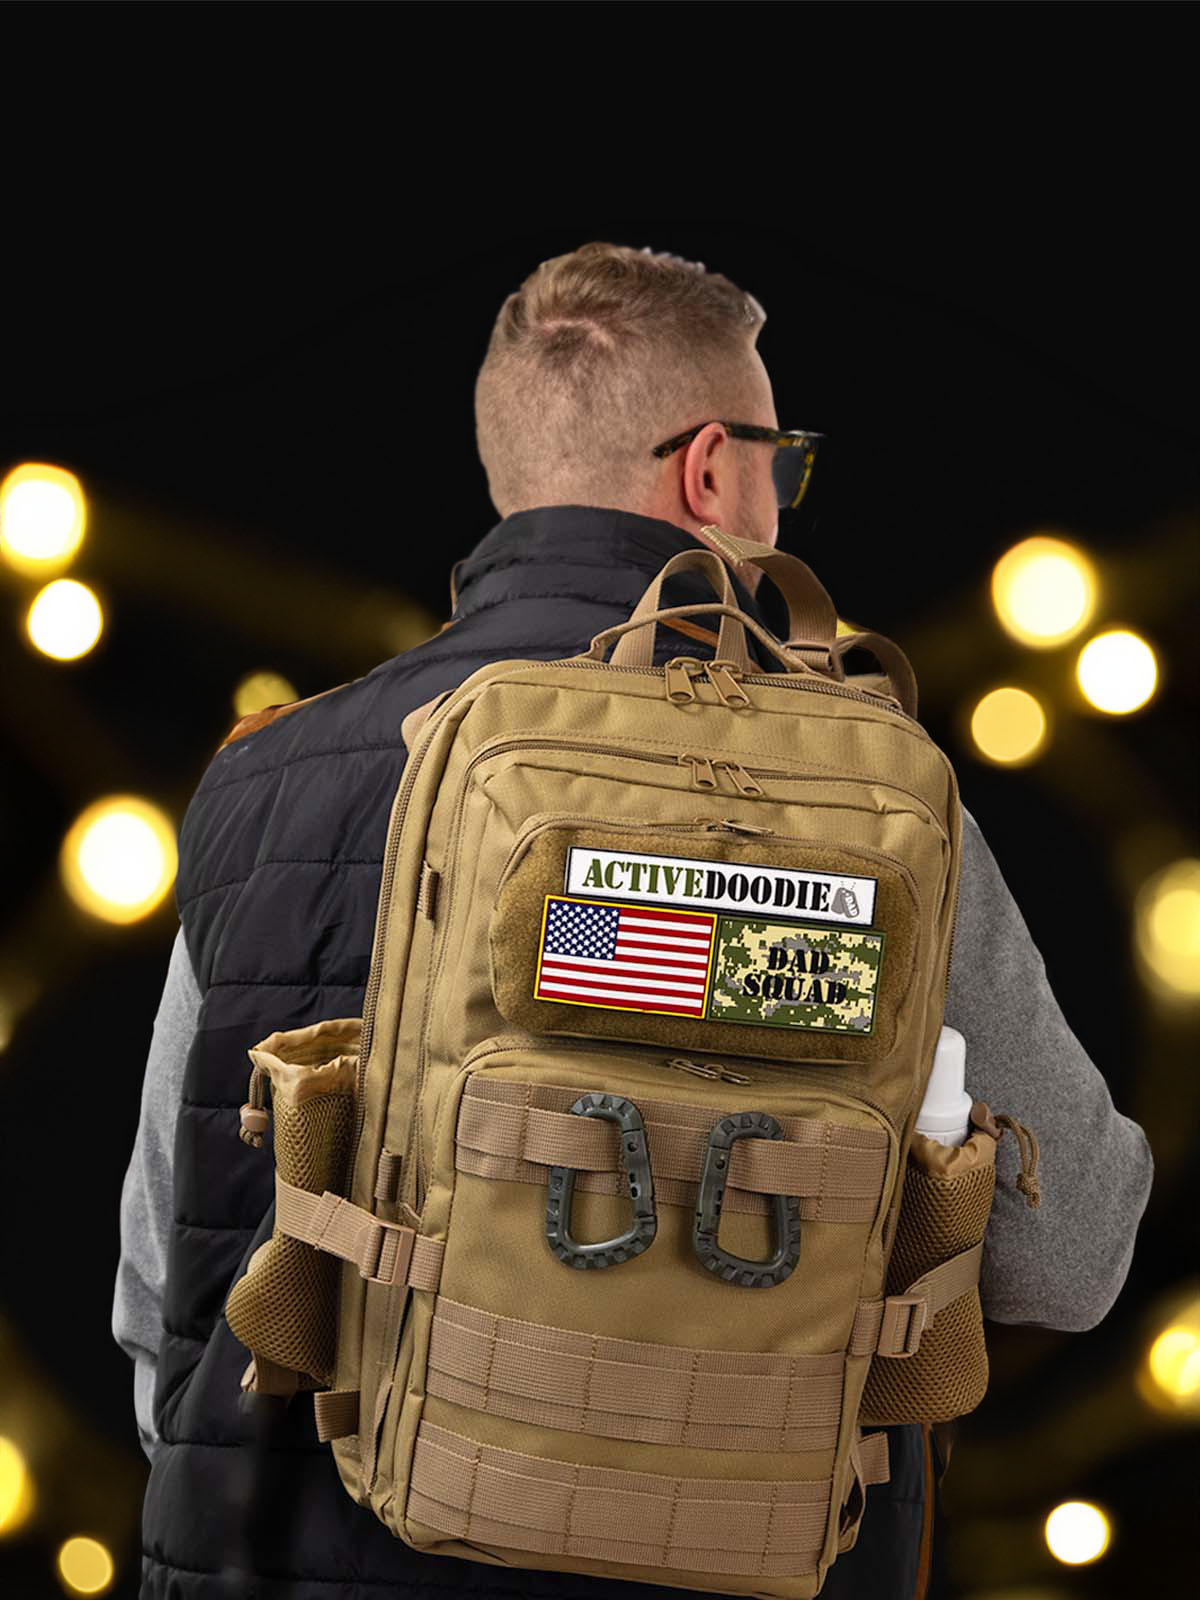 Dad Diaper Bag Backpack for Men with Morale Patches